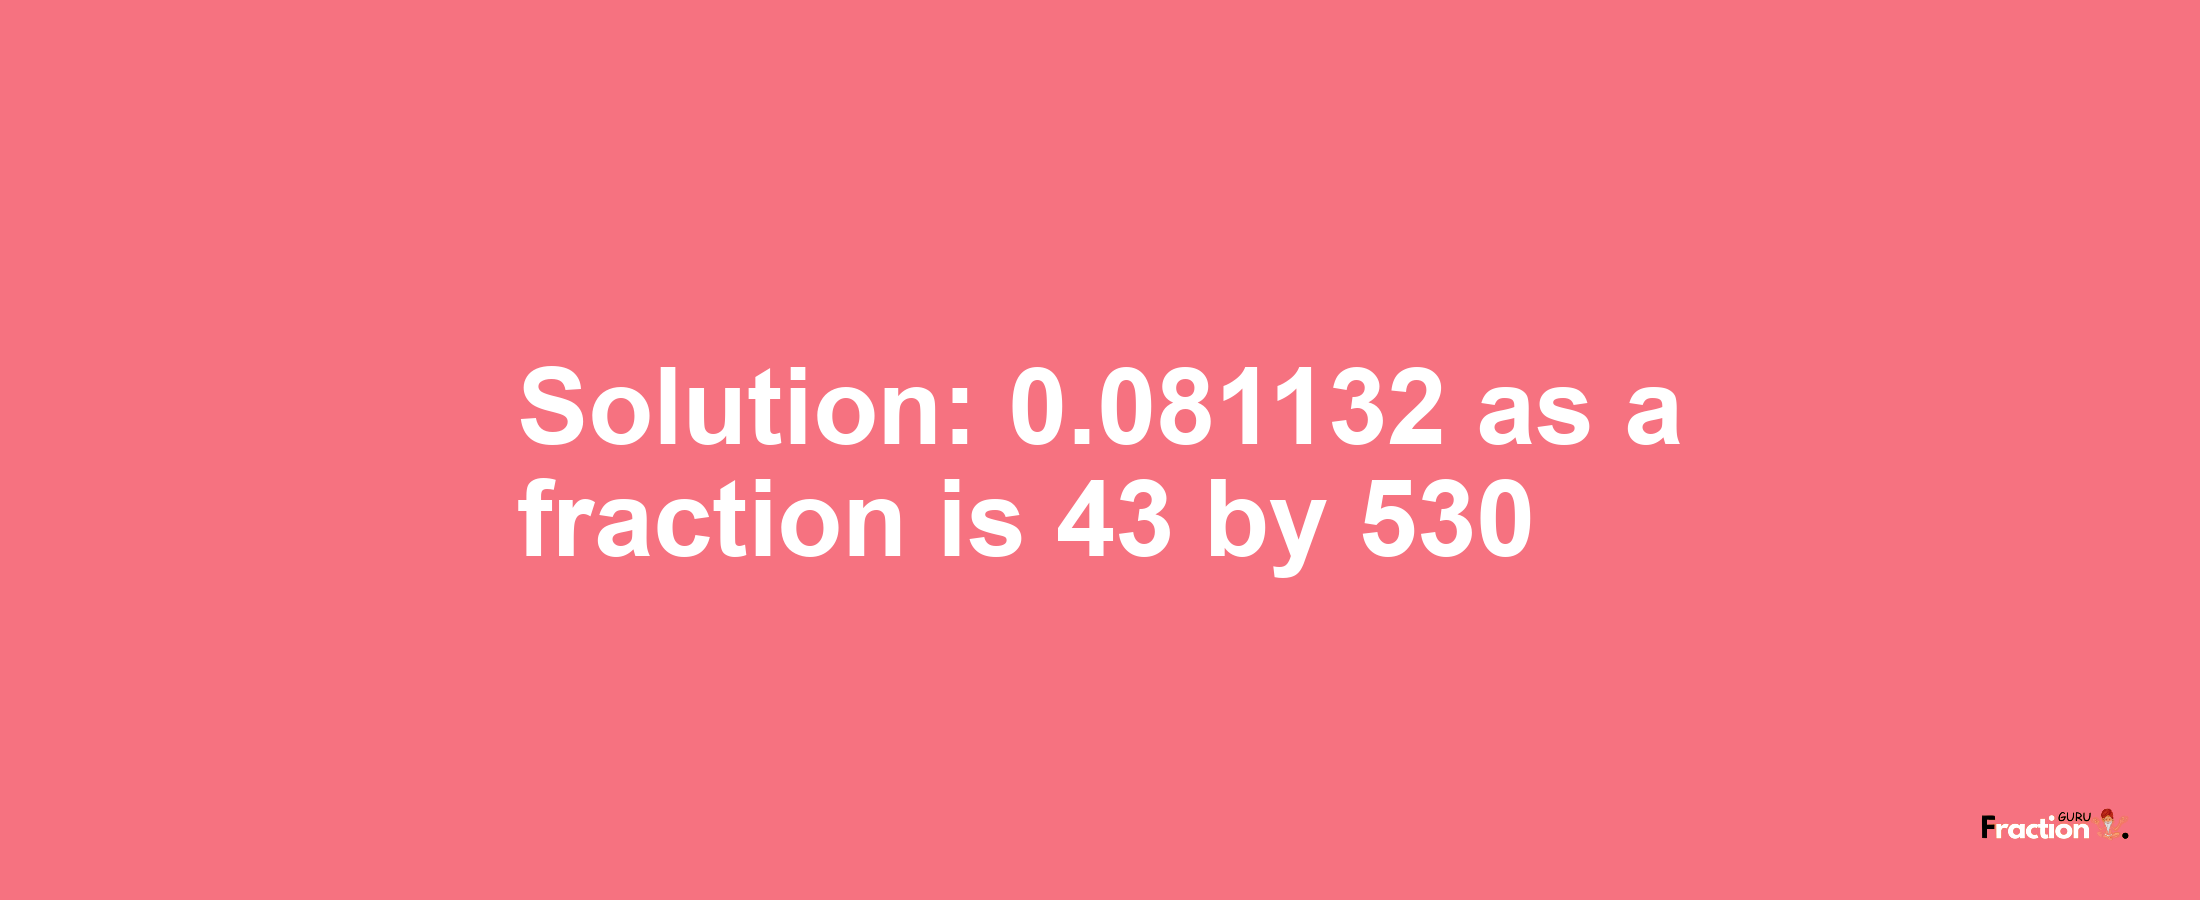 Solution:0.081132 as a fraction is 43/530